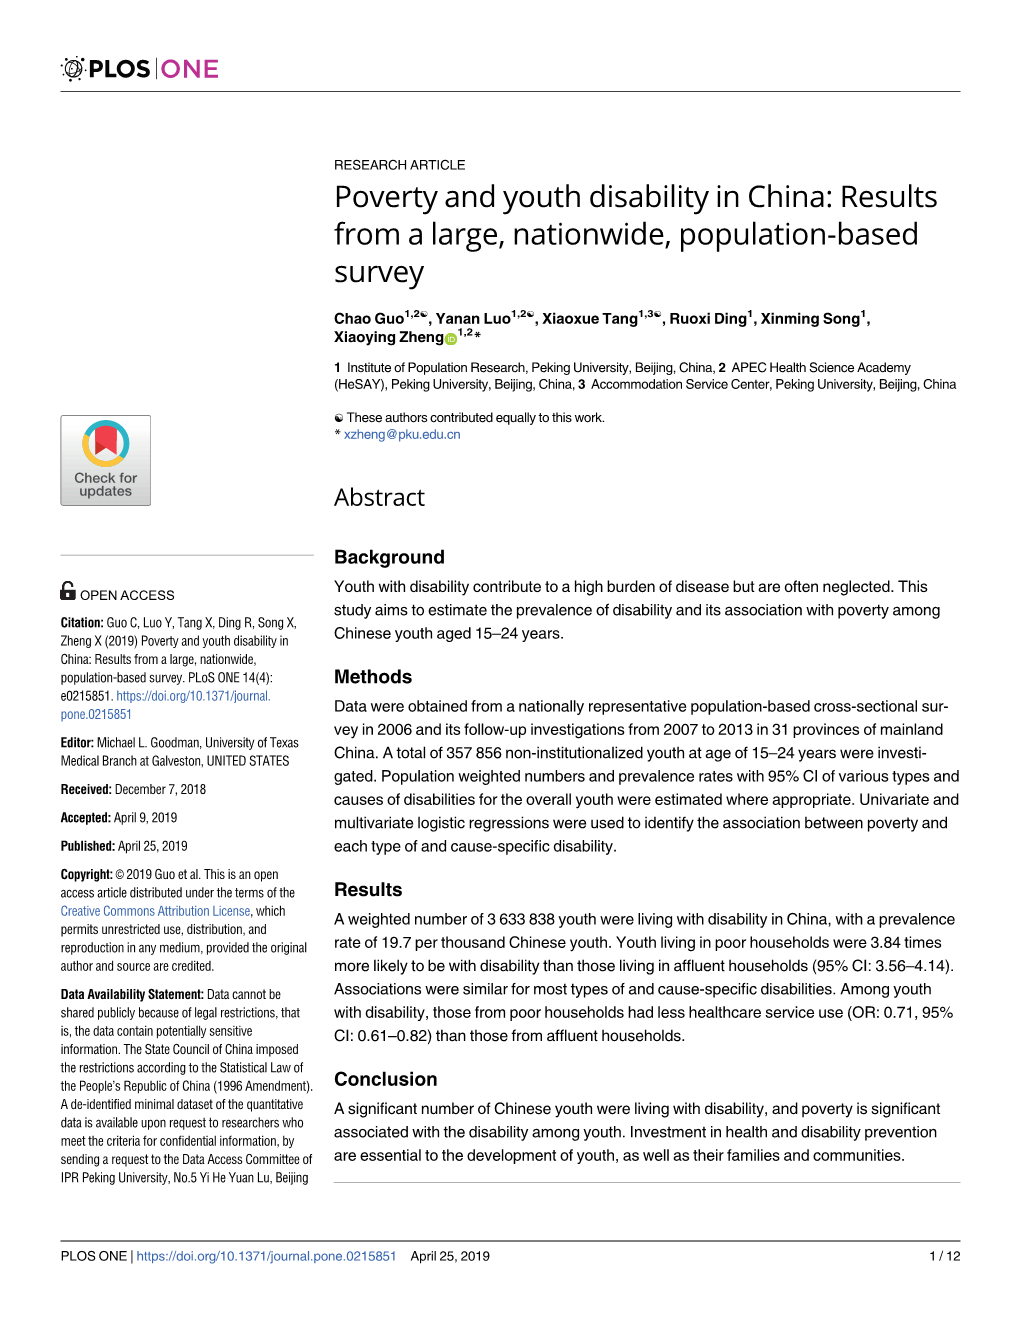 Poverty and Youth Disability in China: Results from a Large, Nationwide, Population-Based Survey